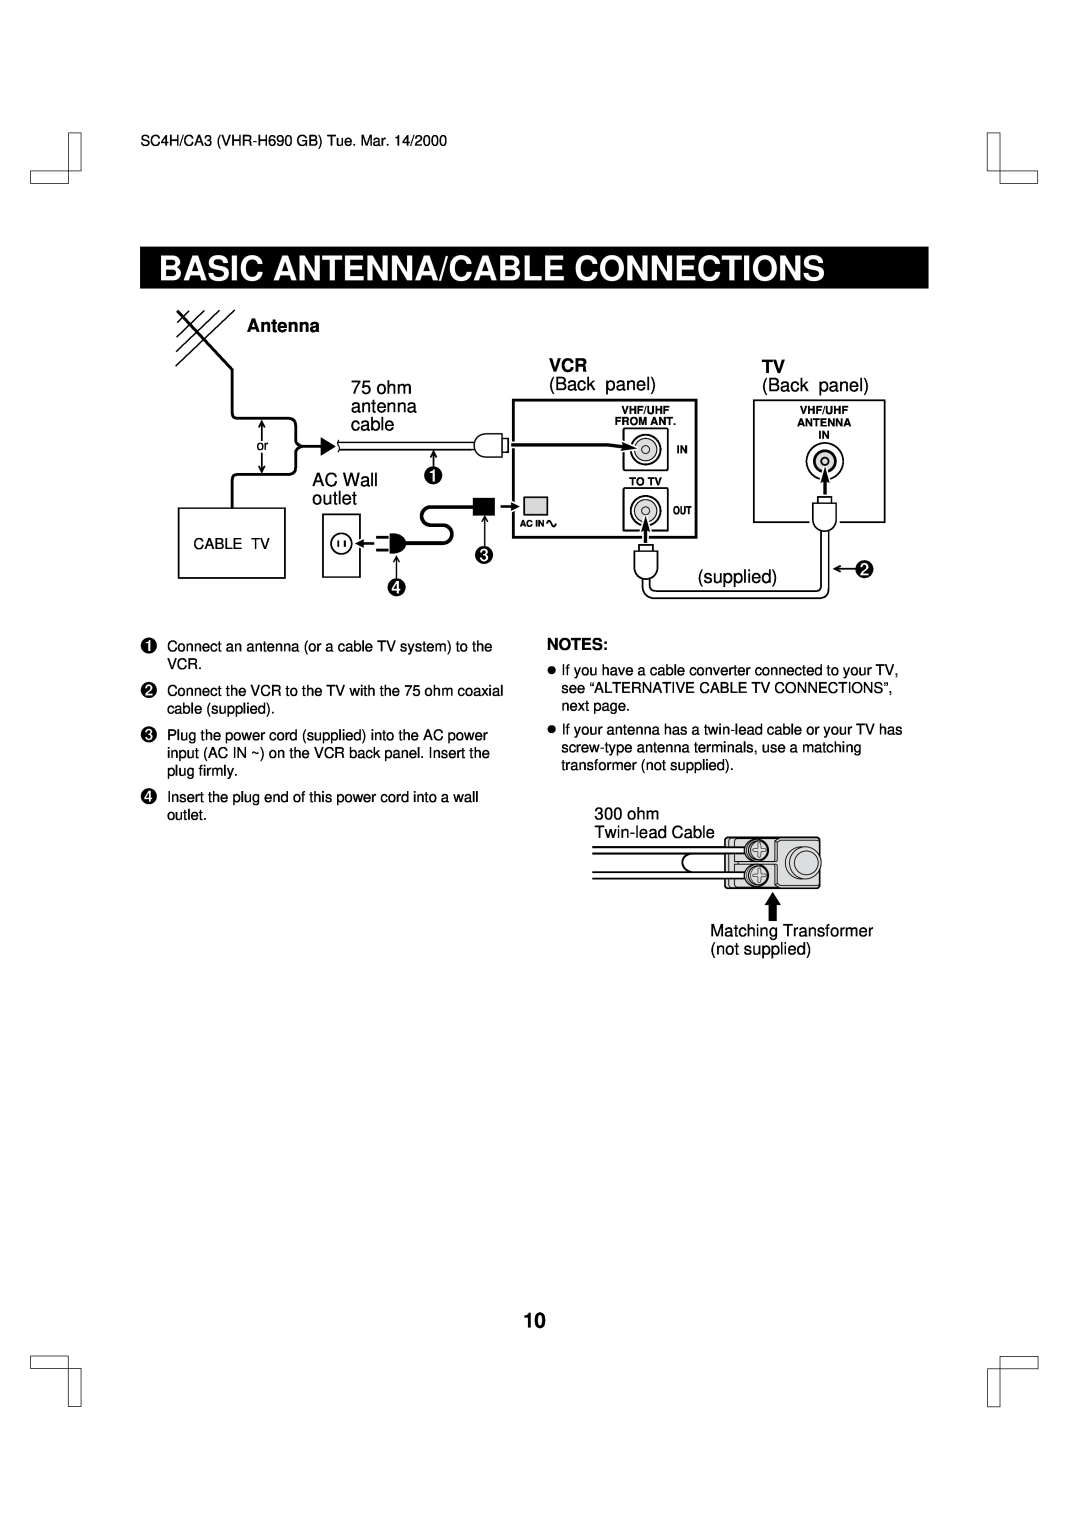 Sanyo VHR-H690 Basic Antenna/Cable Connections, ohm antenna cable, Back panel, AC Wall, outlet, supplied 